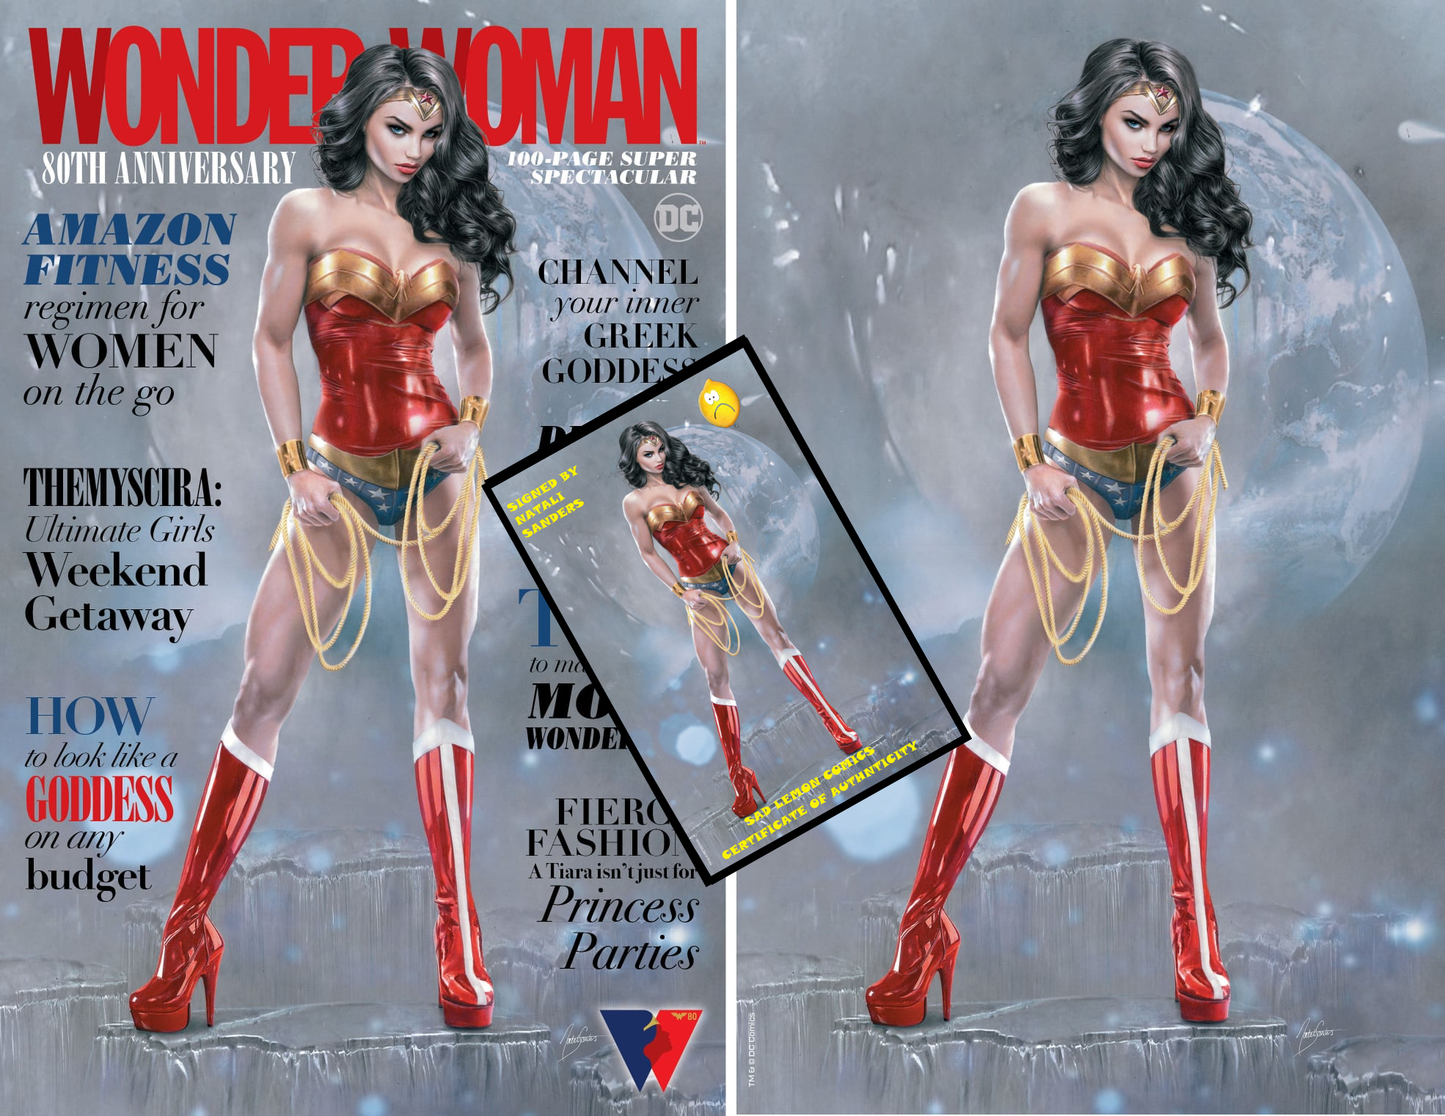 WONDER WOMAN 80TH ANNIVERSARY NATALI SANDERS MAGAZINE HOMAGE/VIRGIN VARIANT SET LIMITED TO 1500 SETS - SIGNED BY NATALI SANDERS WITH COA